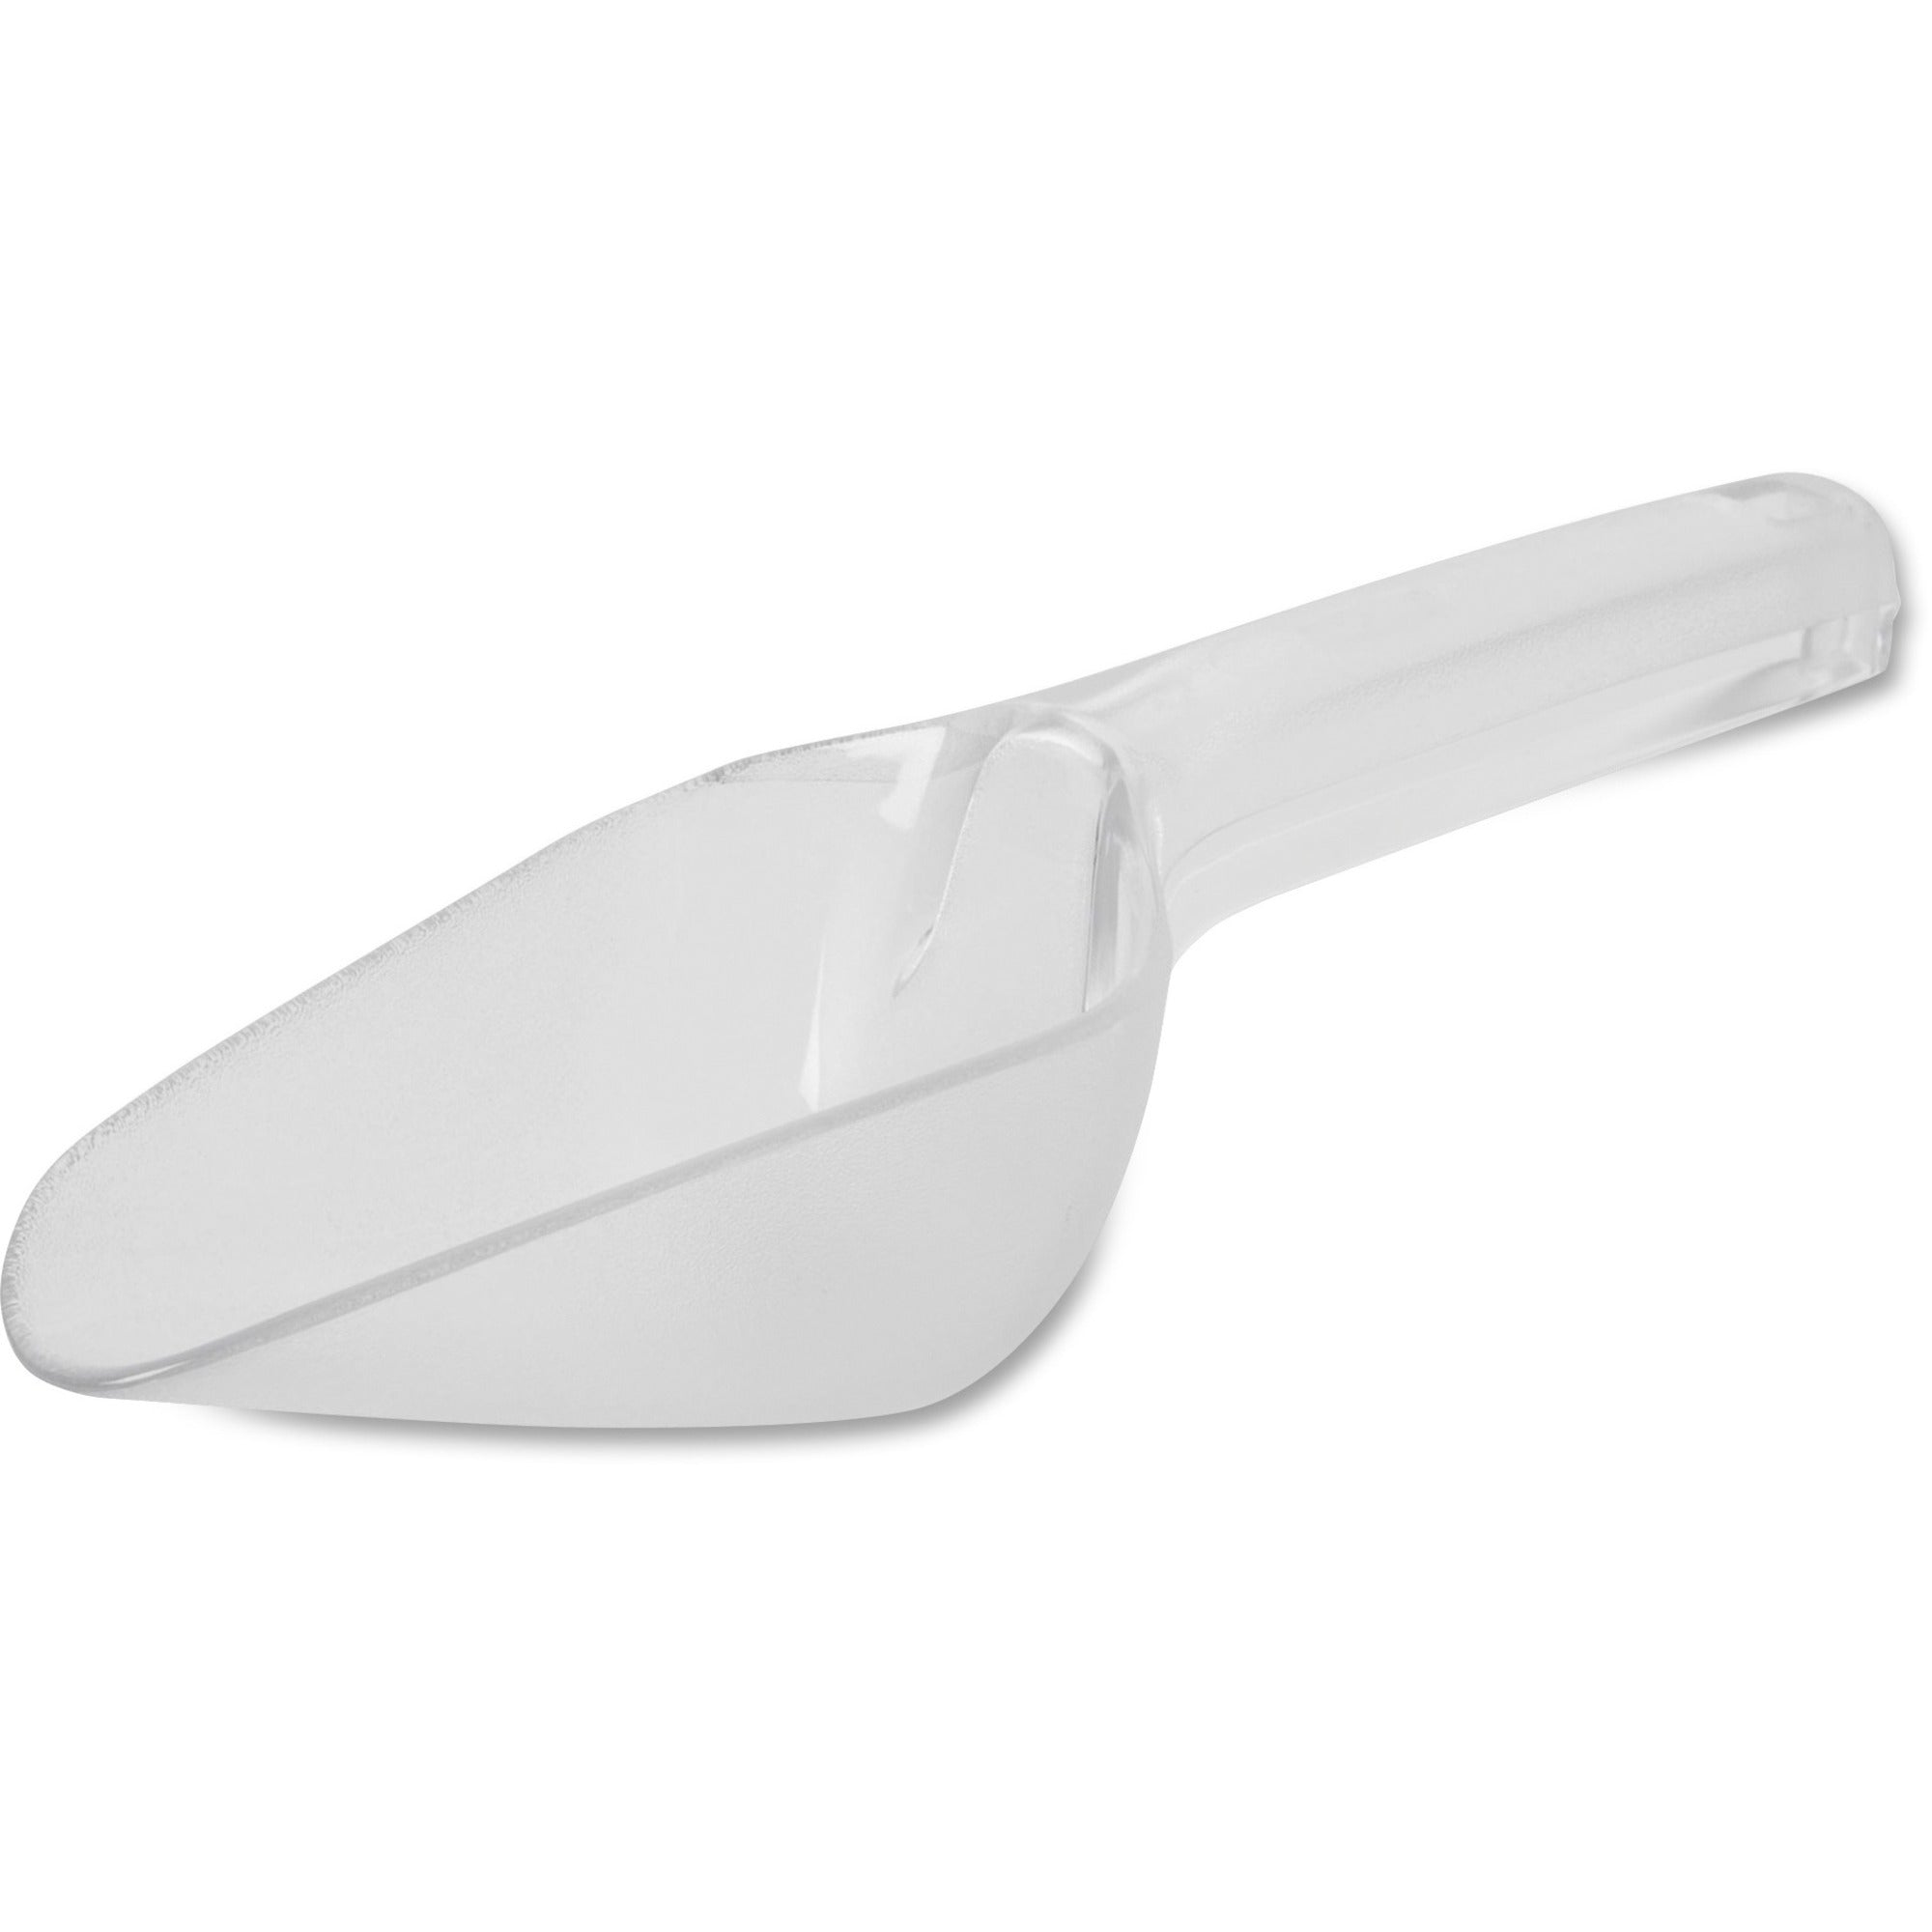 rubbermaid-commercial-bouncer-bar-scoop-1each-scoop-1-x-bar-scoop-kitchen-dishwasher-safe-clear_rcp288200clr - 1